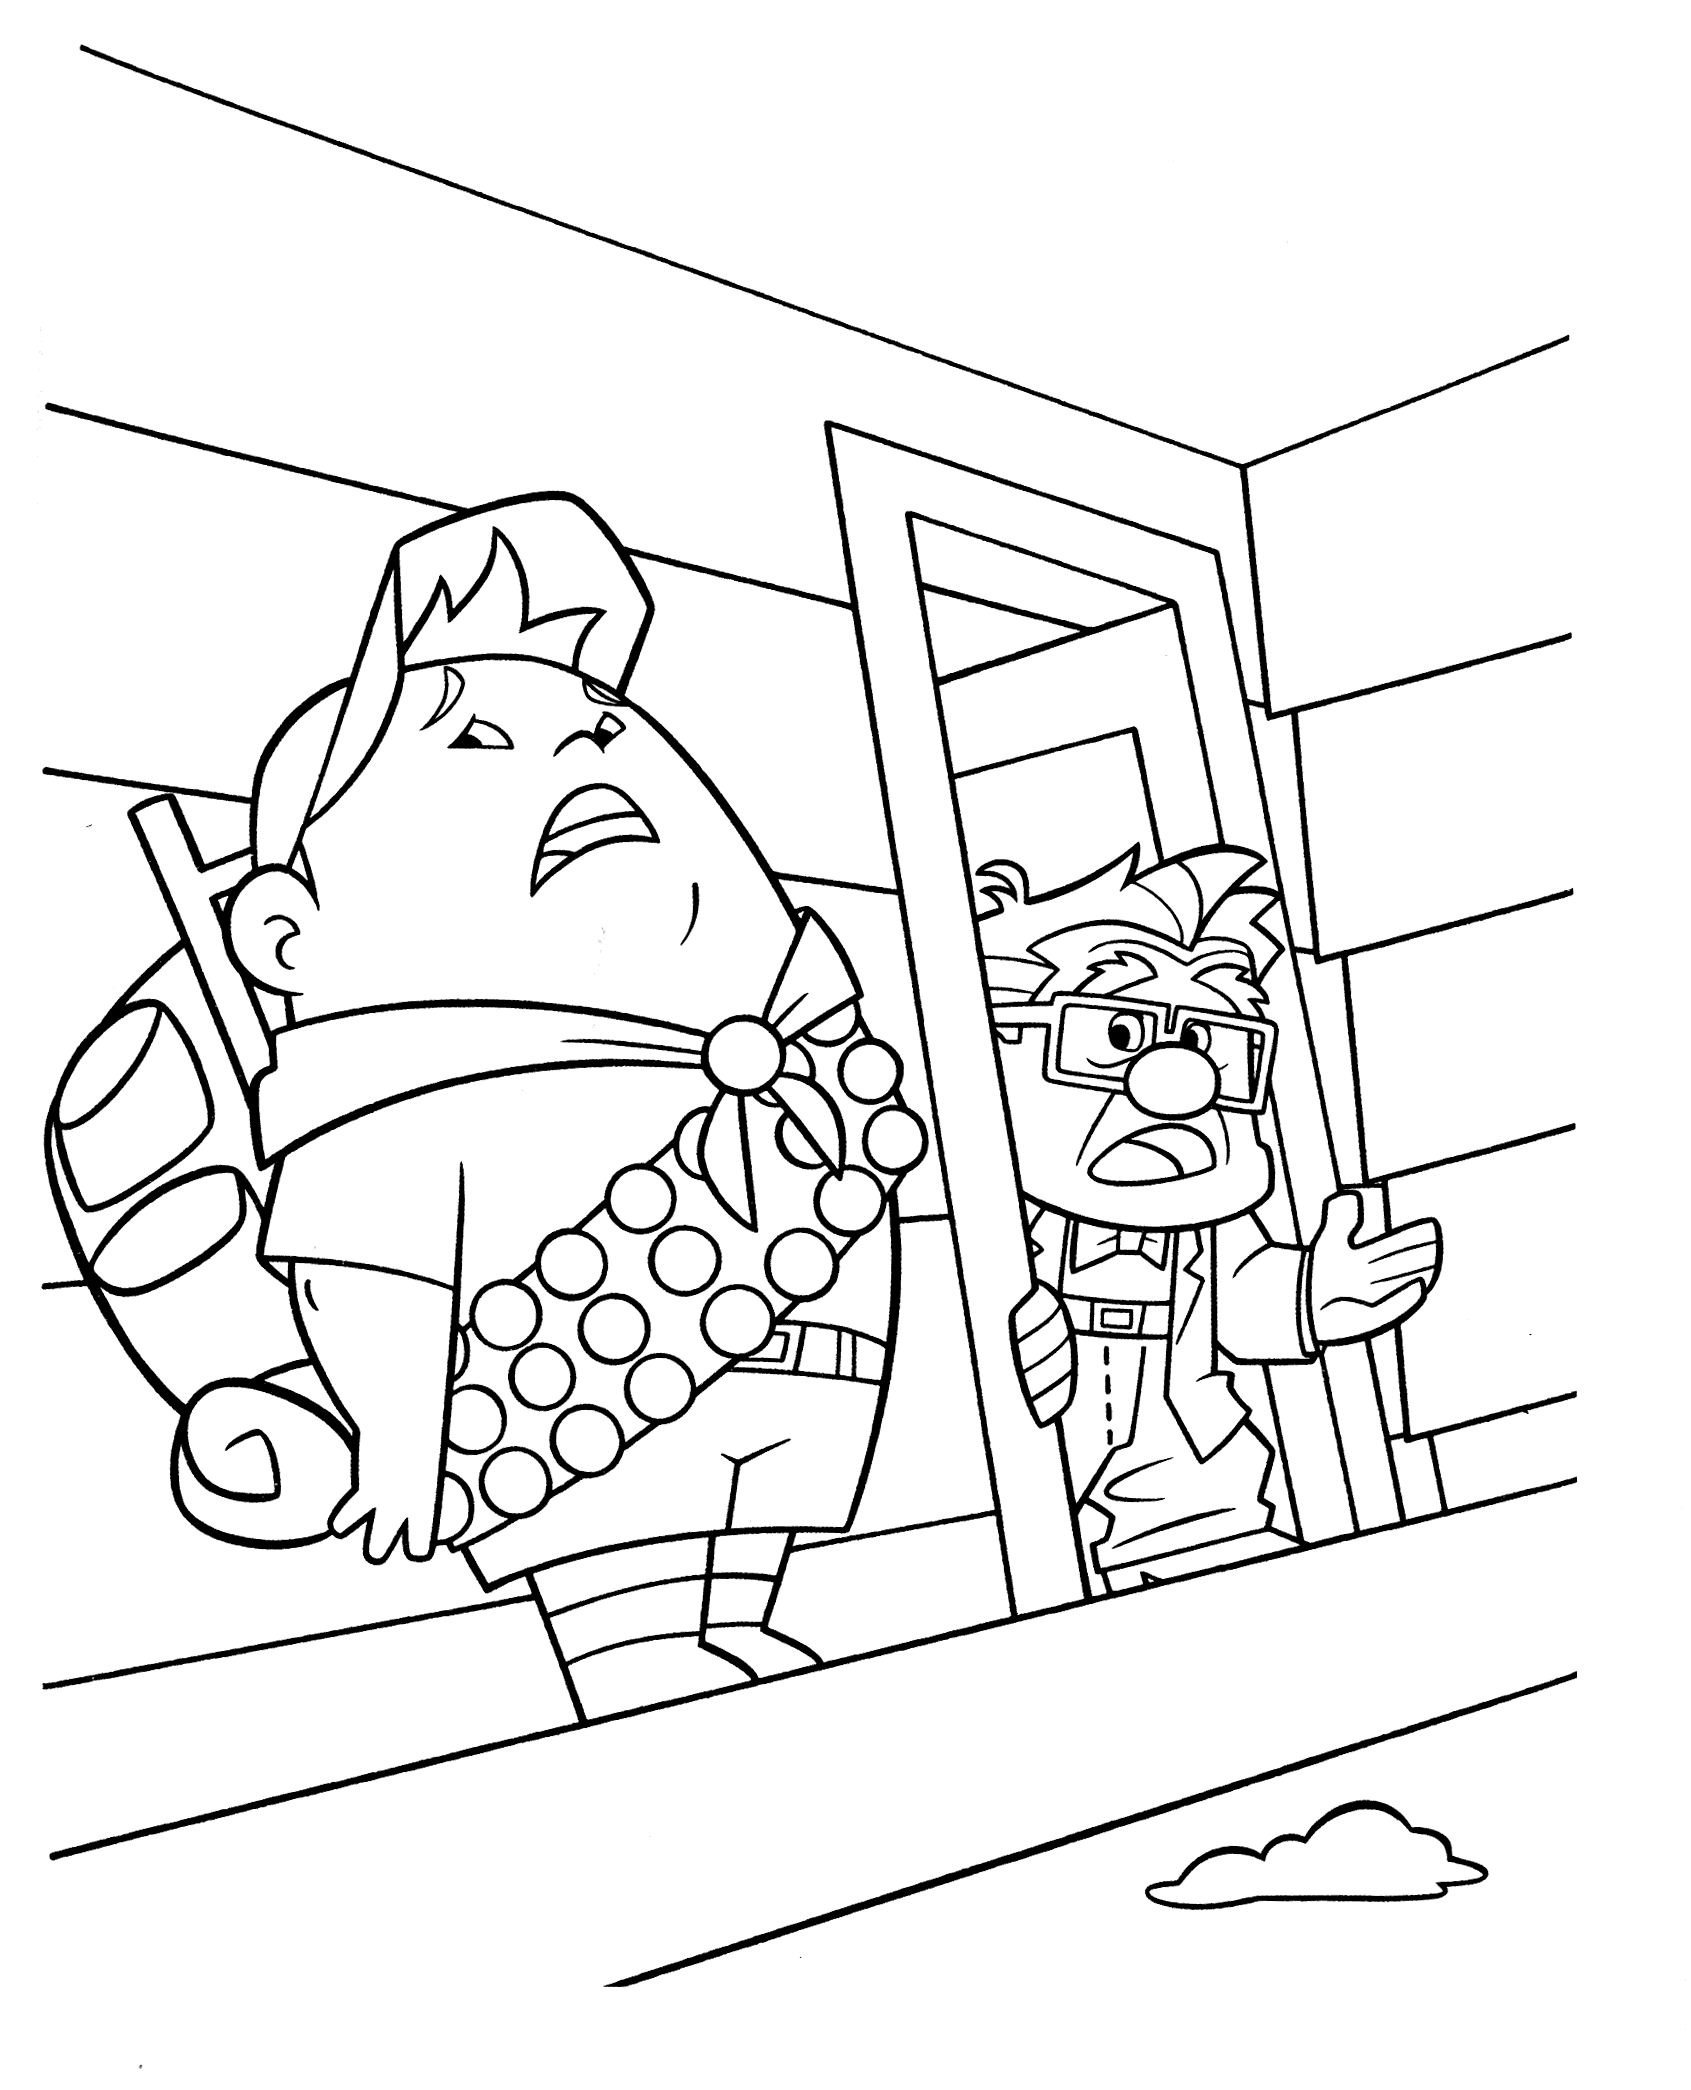 Coloring page - Again Russell